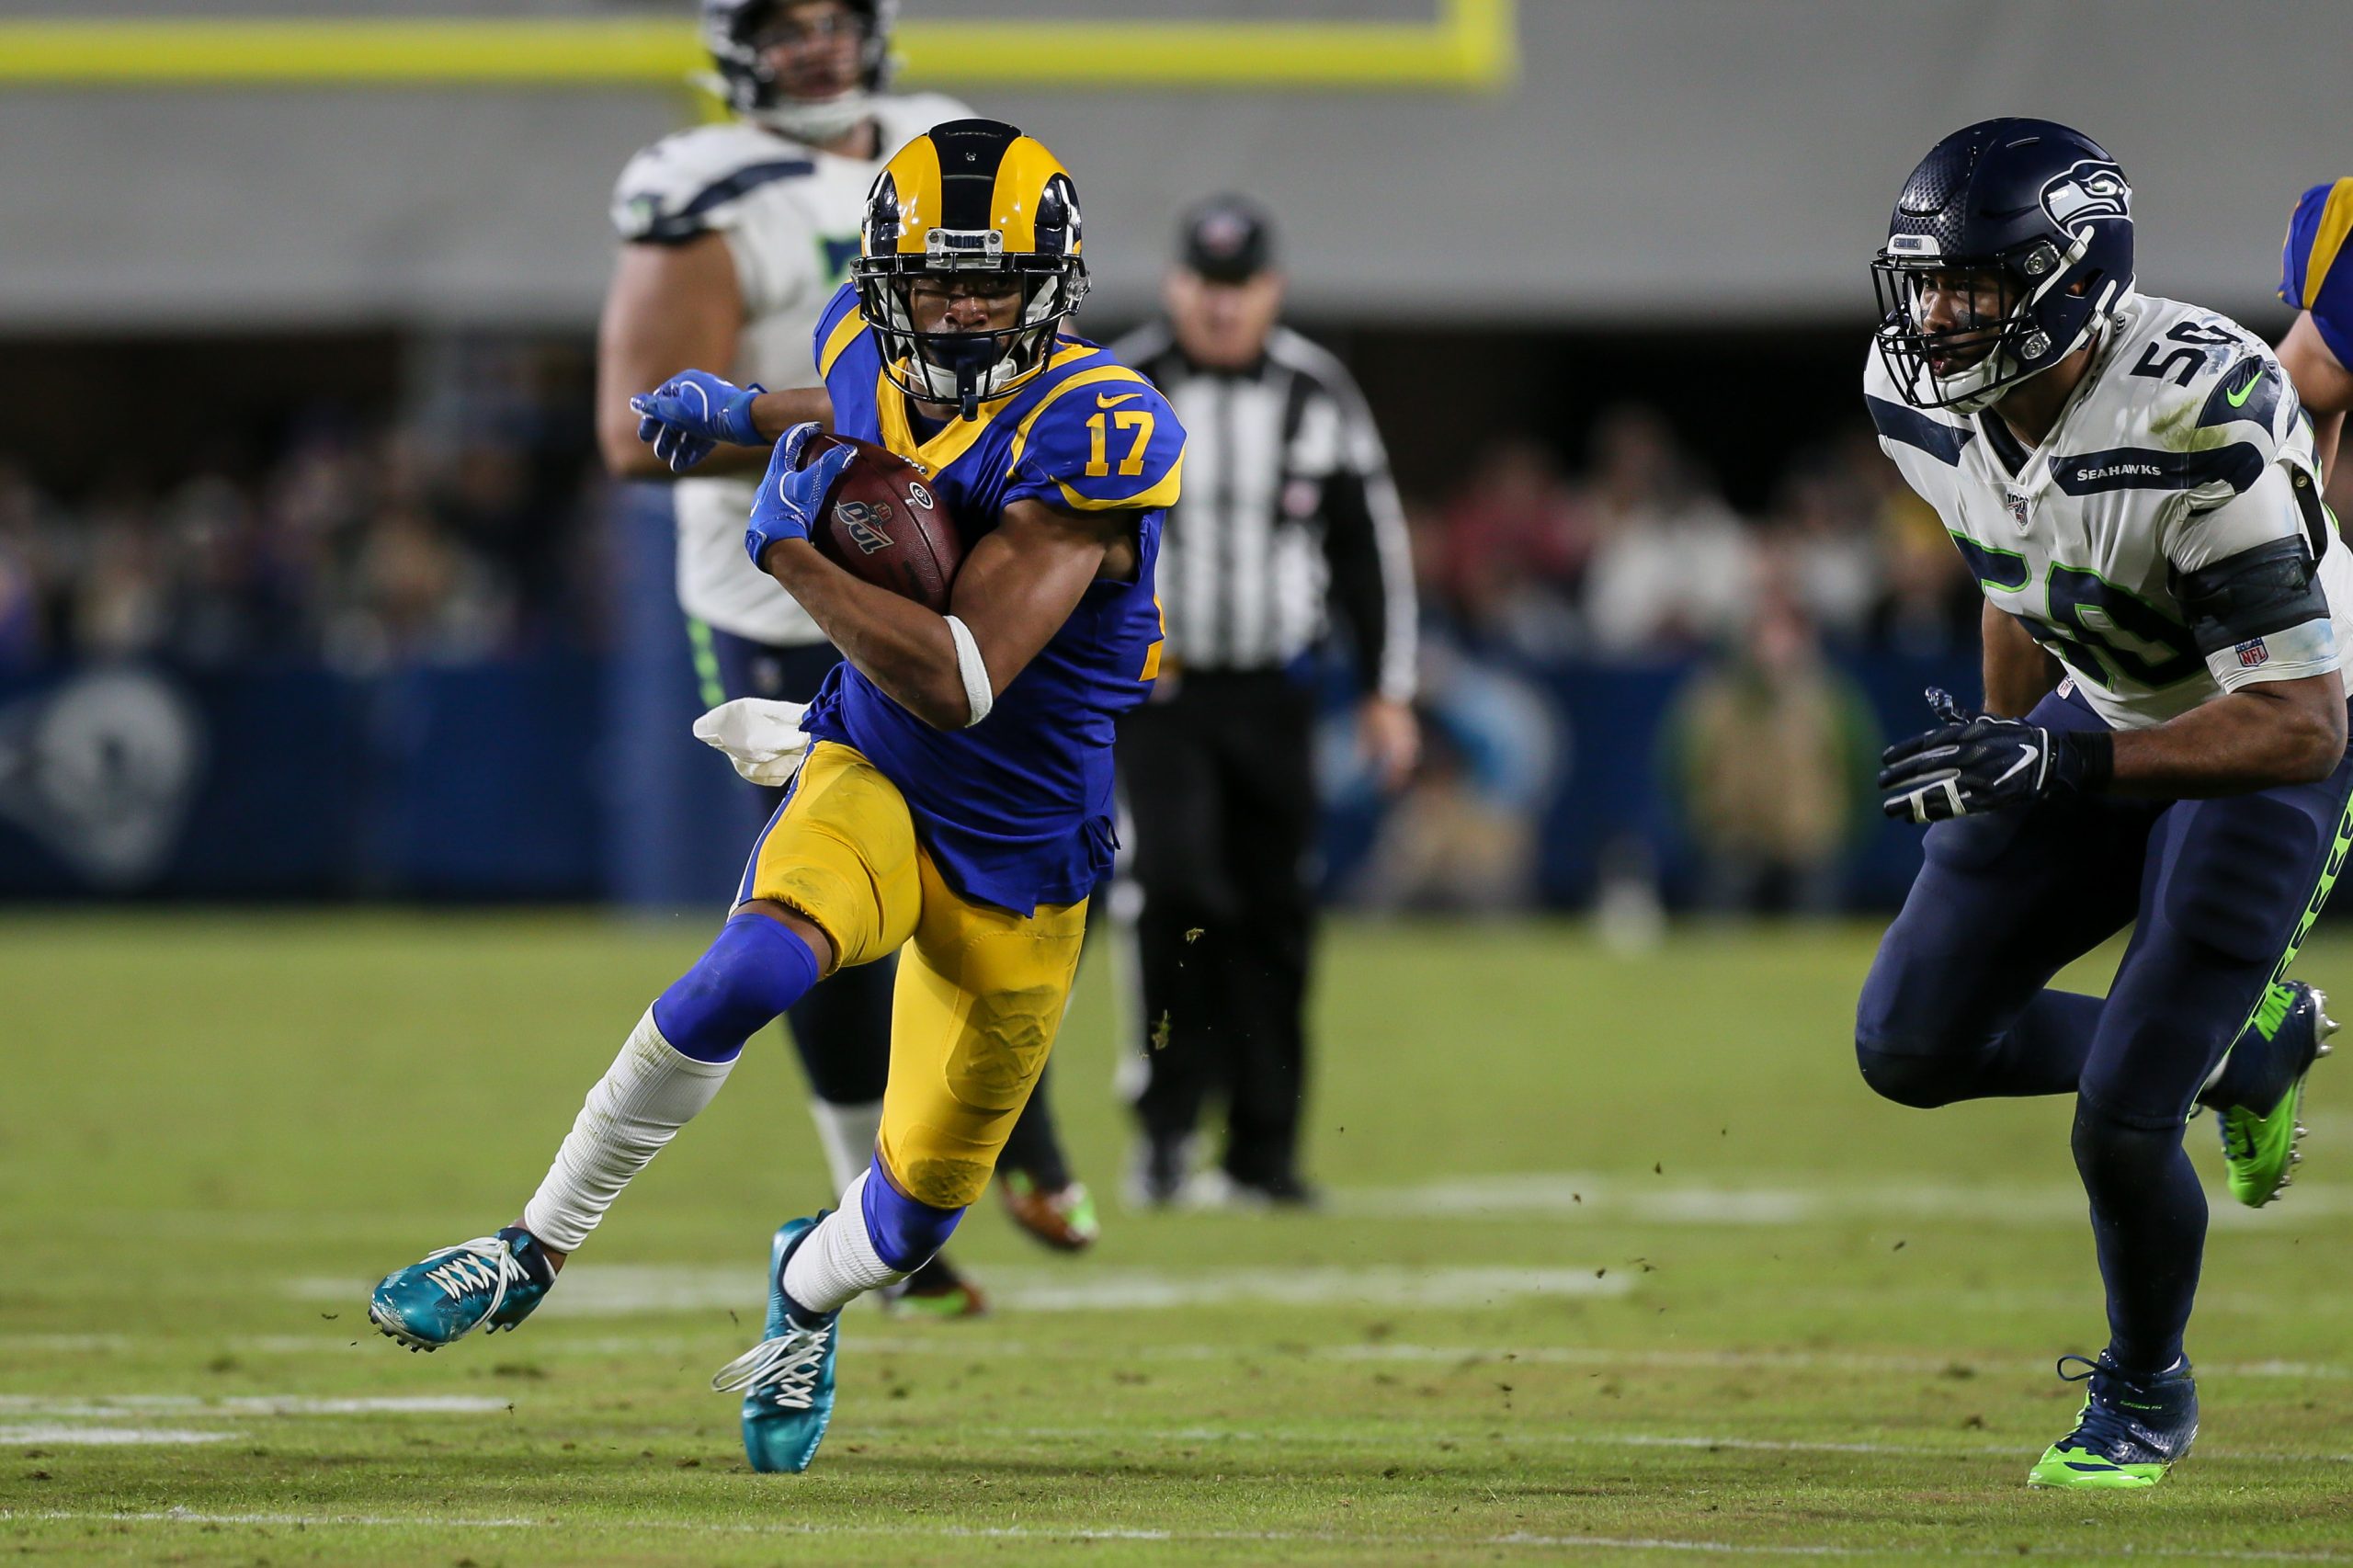 LOS ANGELES, CA - DECEMBER 08: Los Angeles Rams wide receiver Robert Woods (17) runs for a first down during the NFL, Am